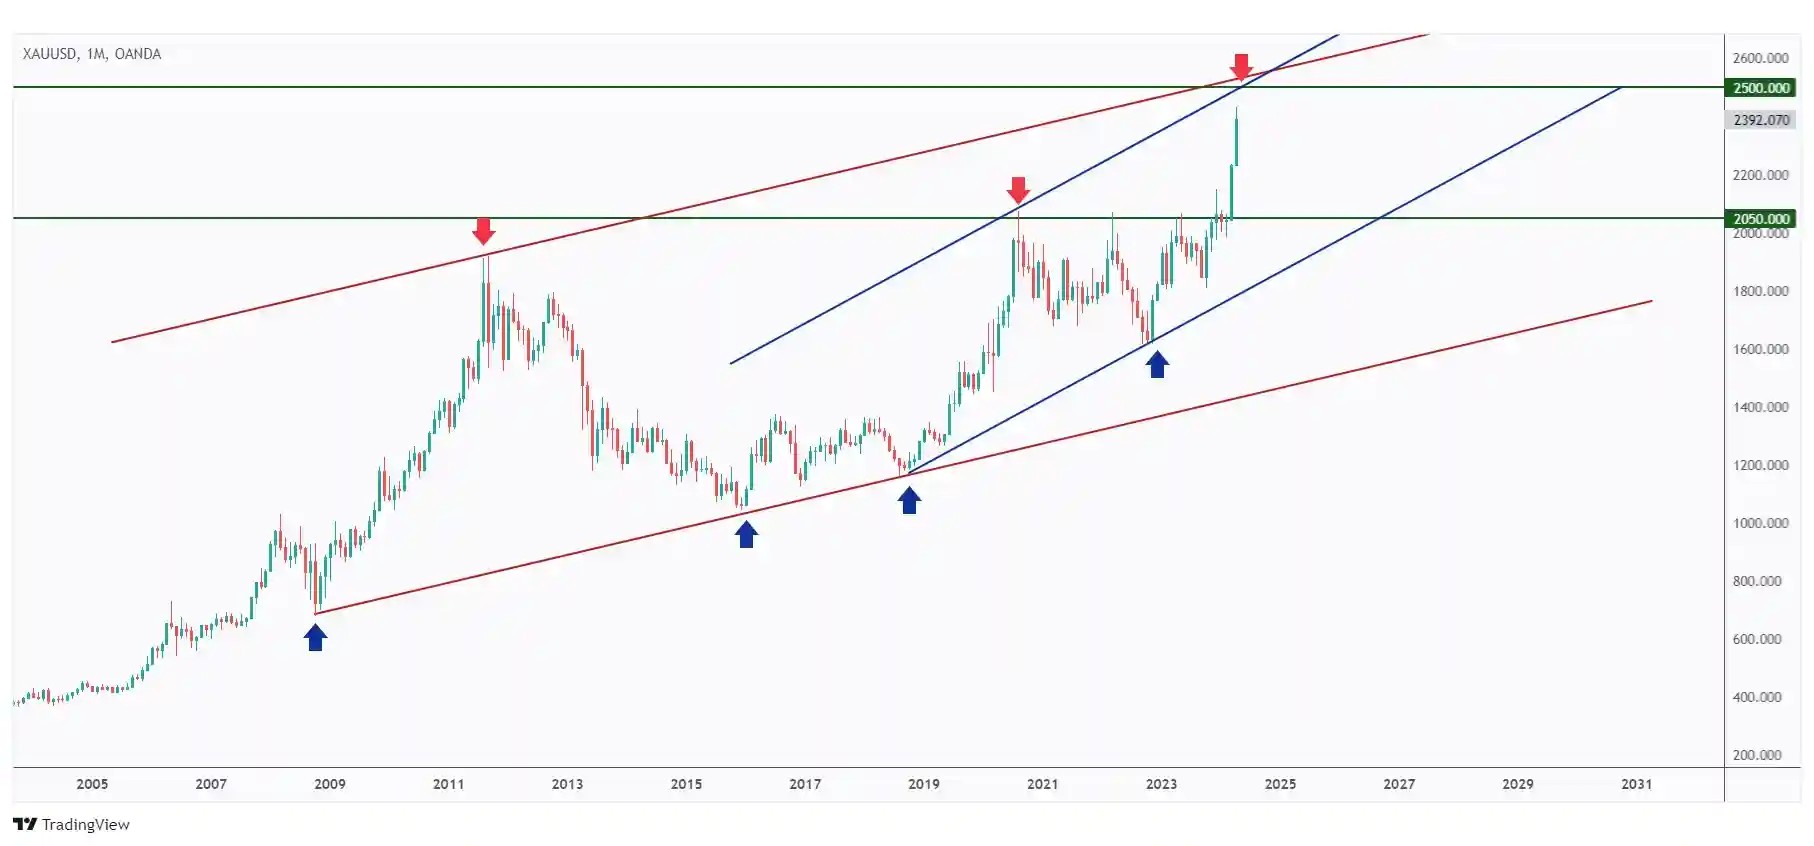 Gold monthly chart approaching the upper bound of the rising channels.